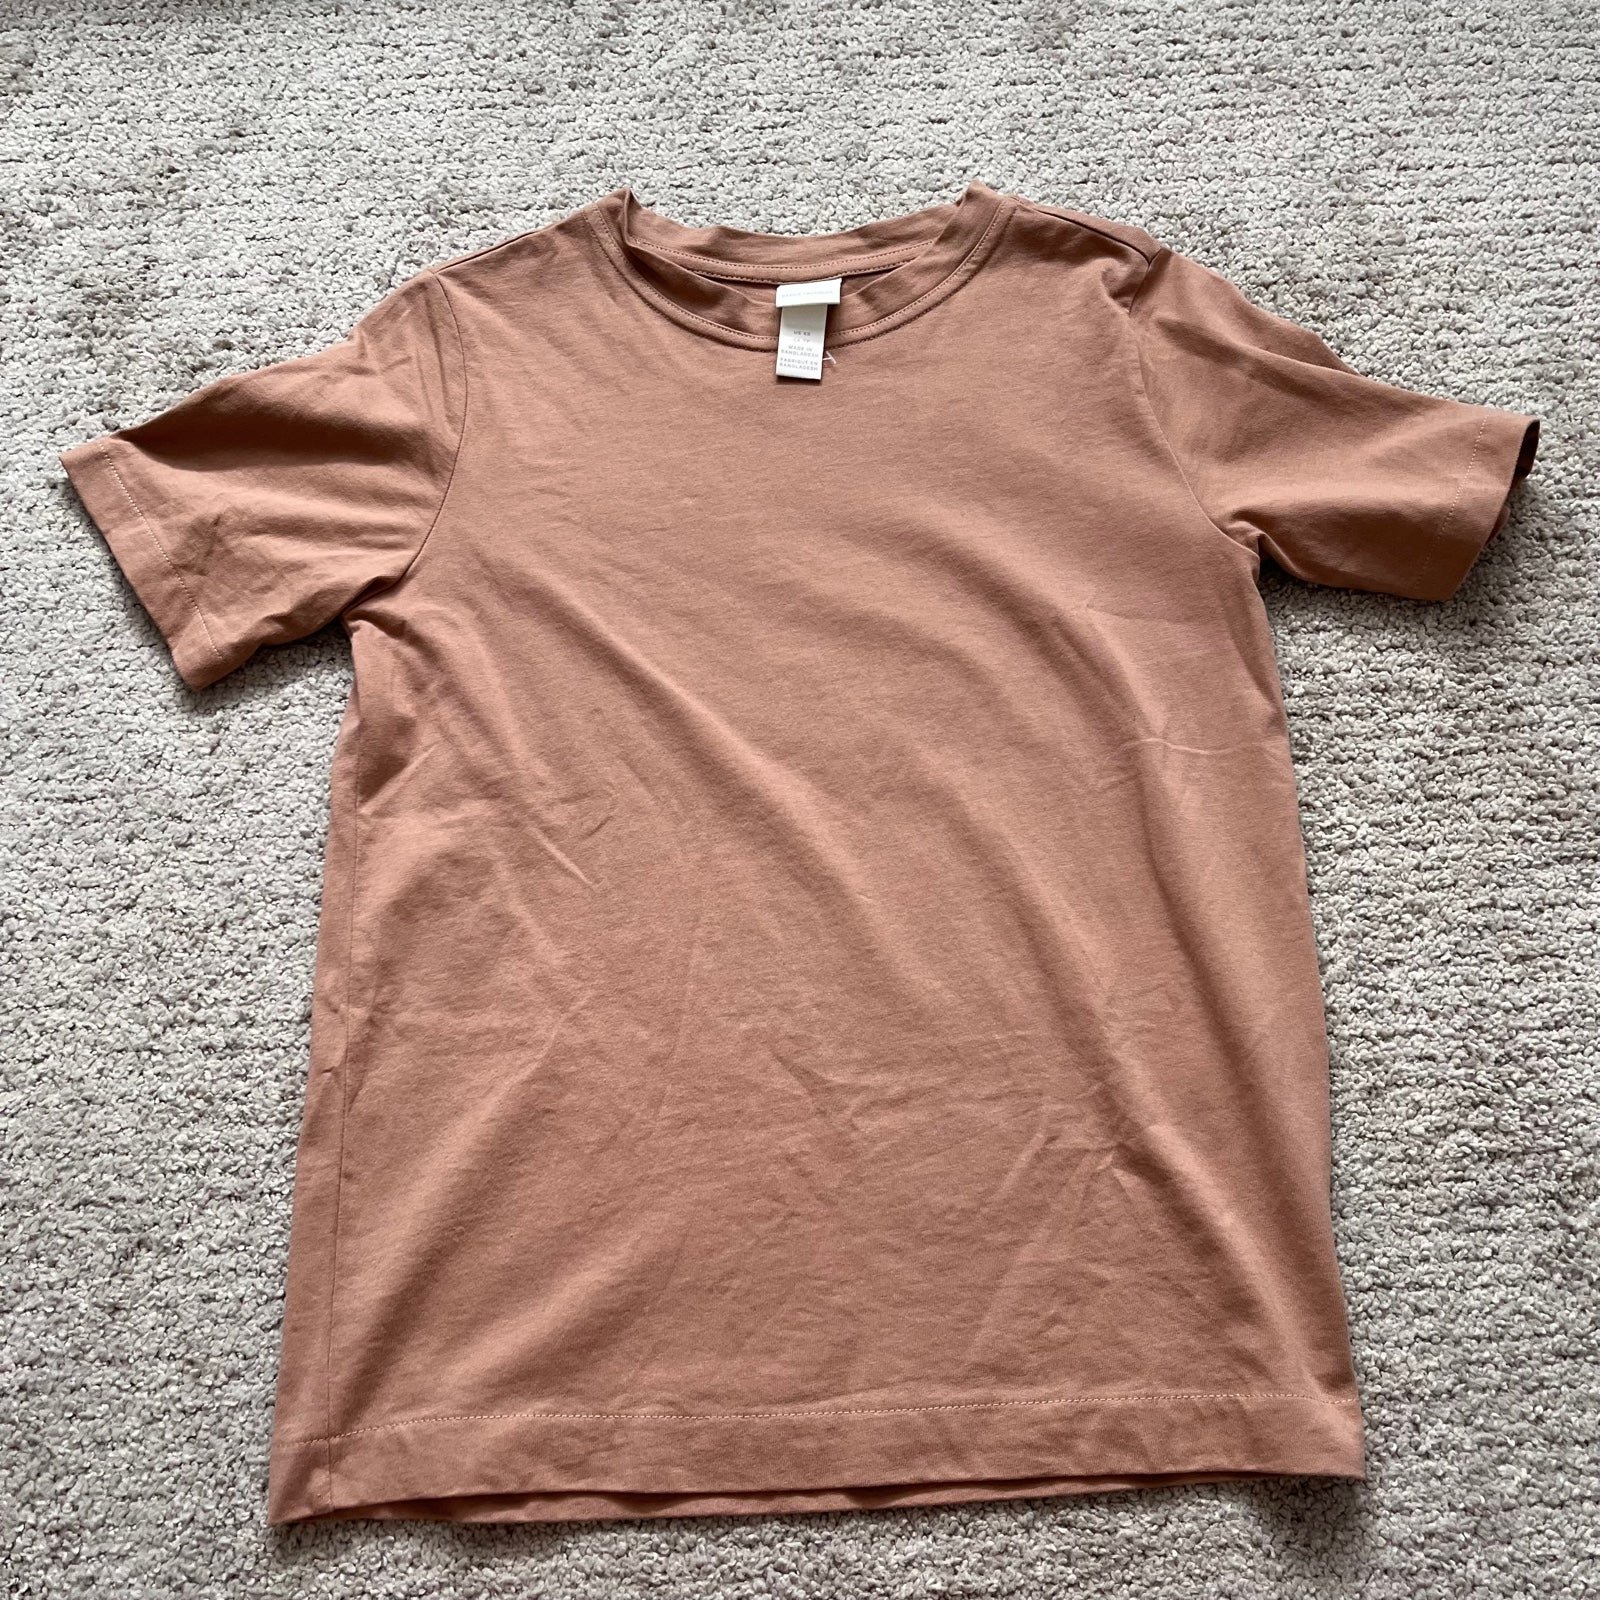 The Best Seller Bundle 2 Nude Brown Tan Tshirt Abercrombie & Fitch H&M XS GpHsy7jji High Quaity